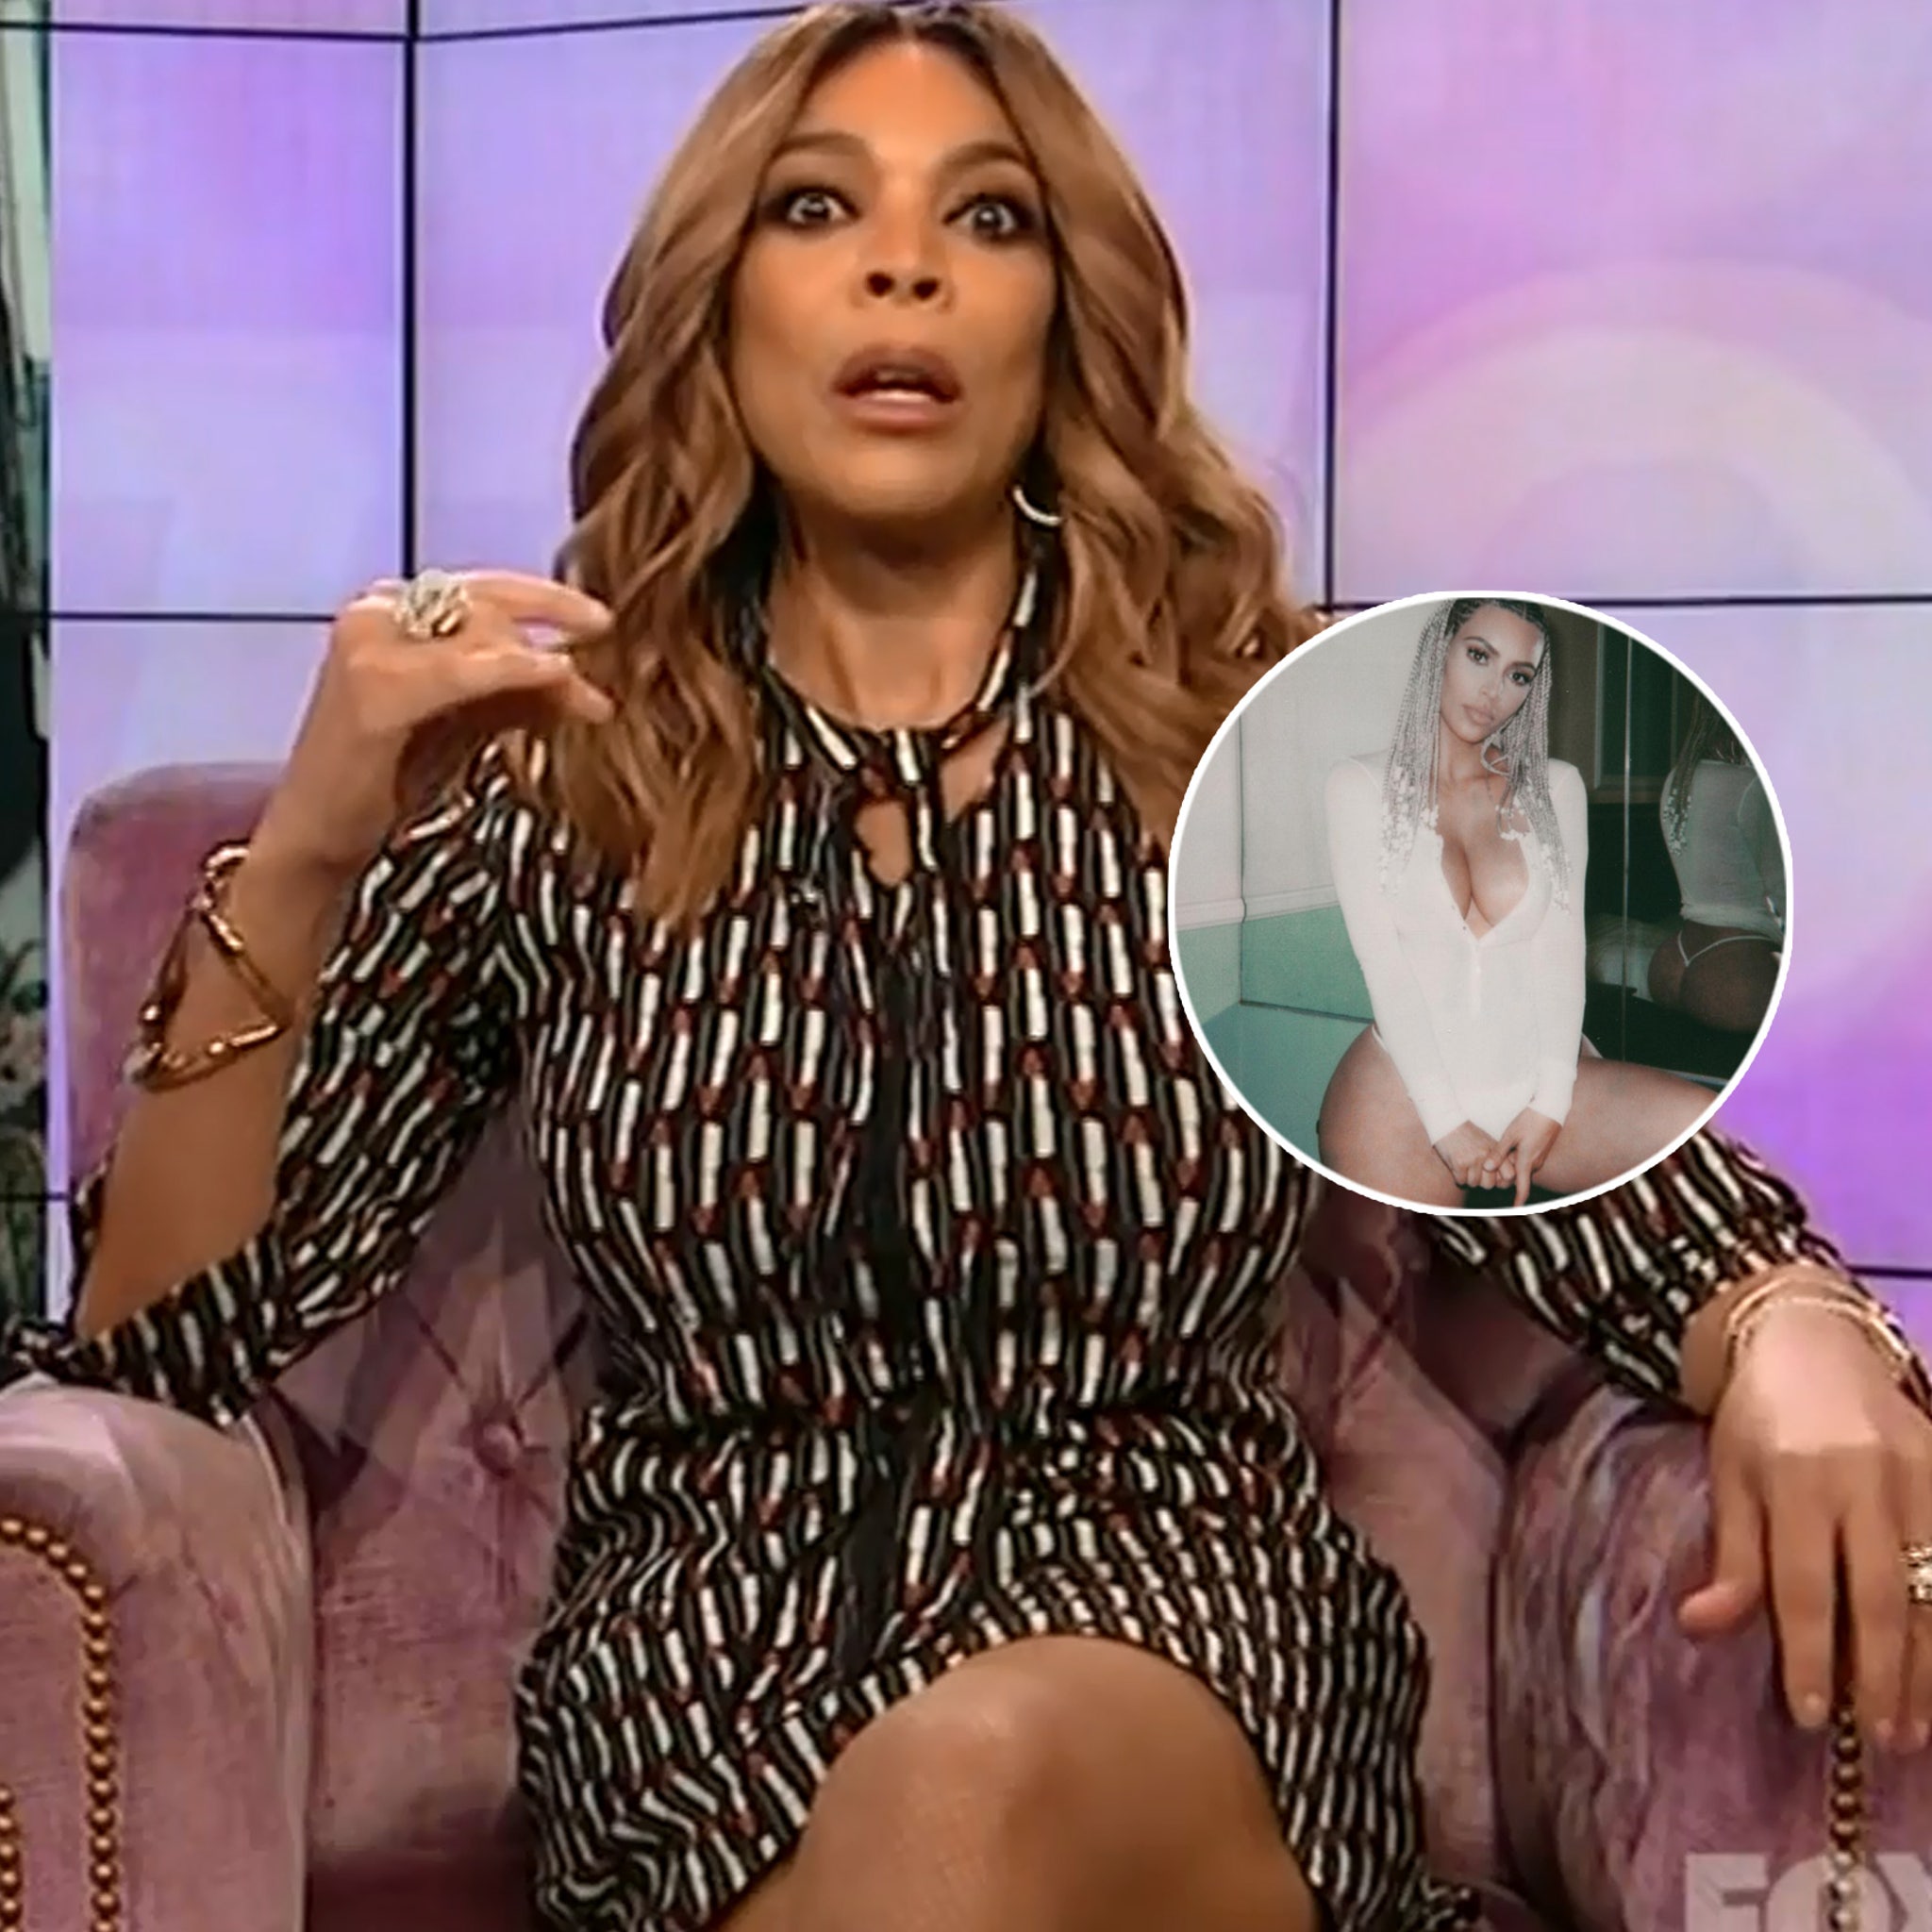 Nude pictures of wendy williams